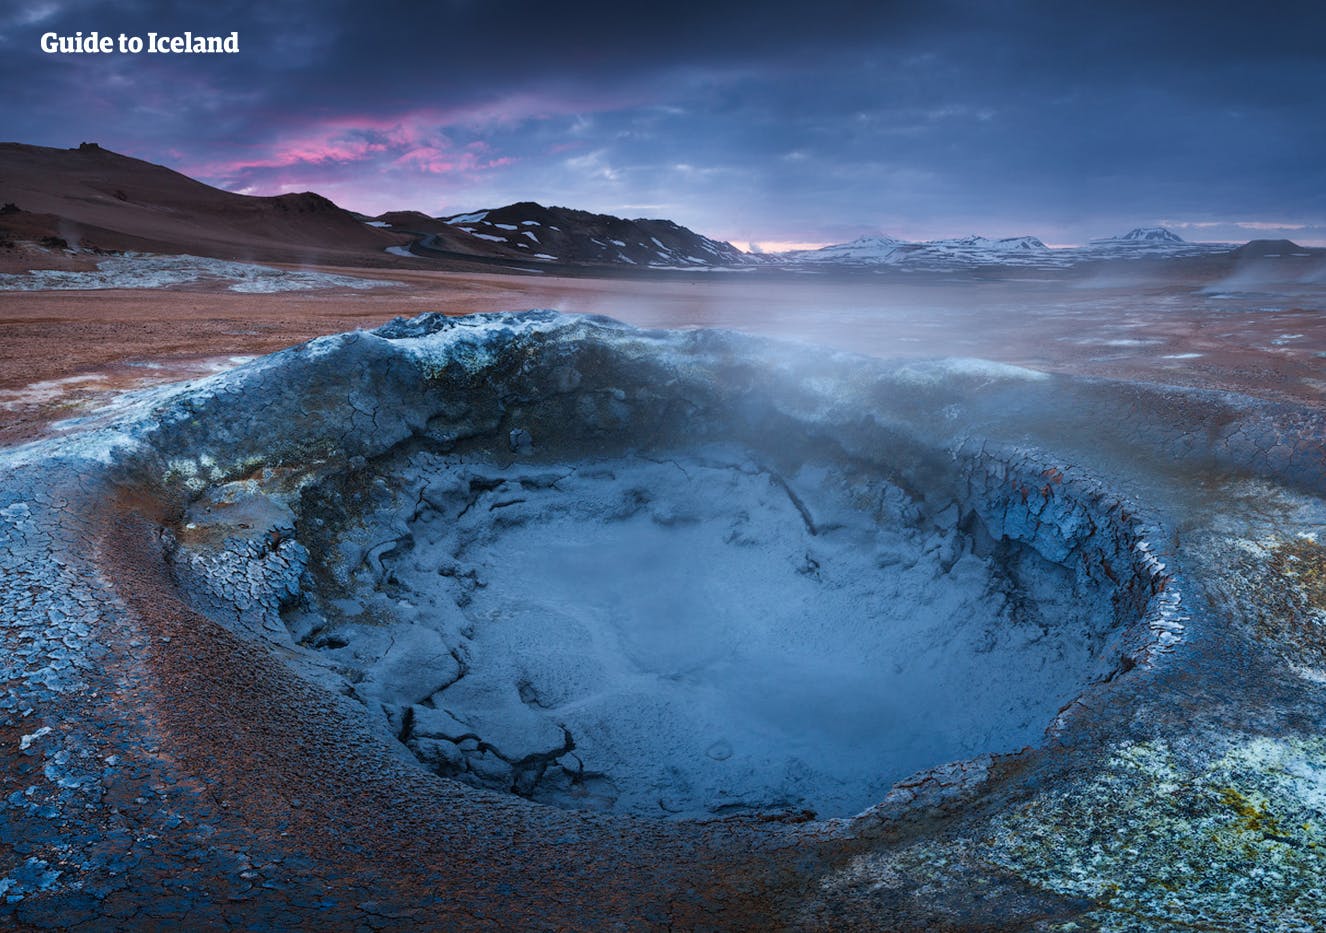 Lake Myvatn has a number of nearby geothermal areas.